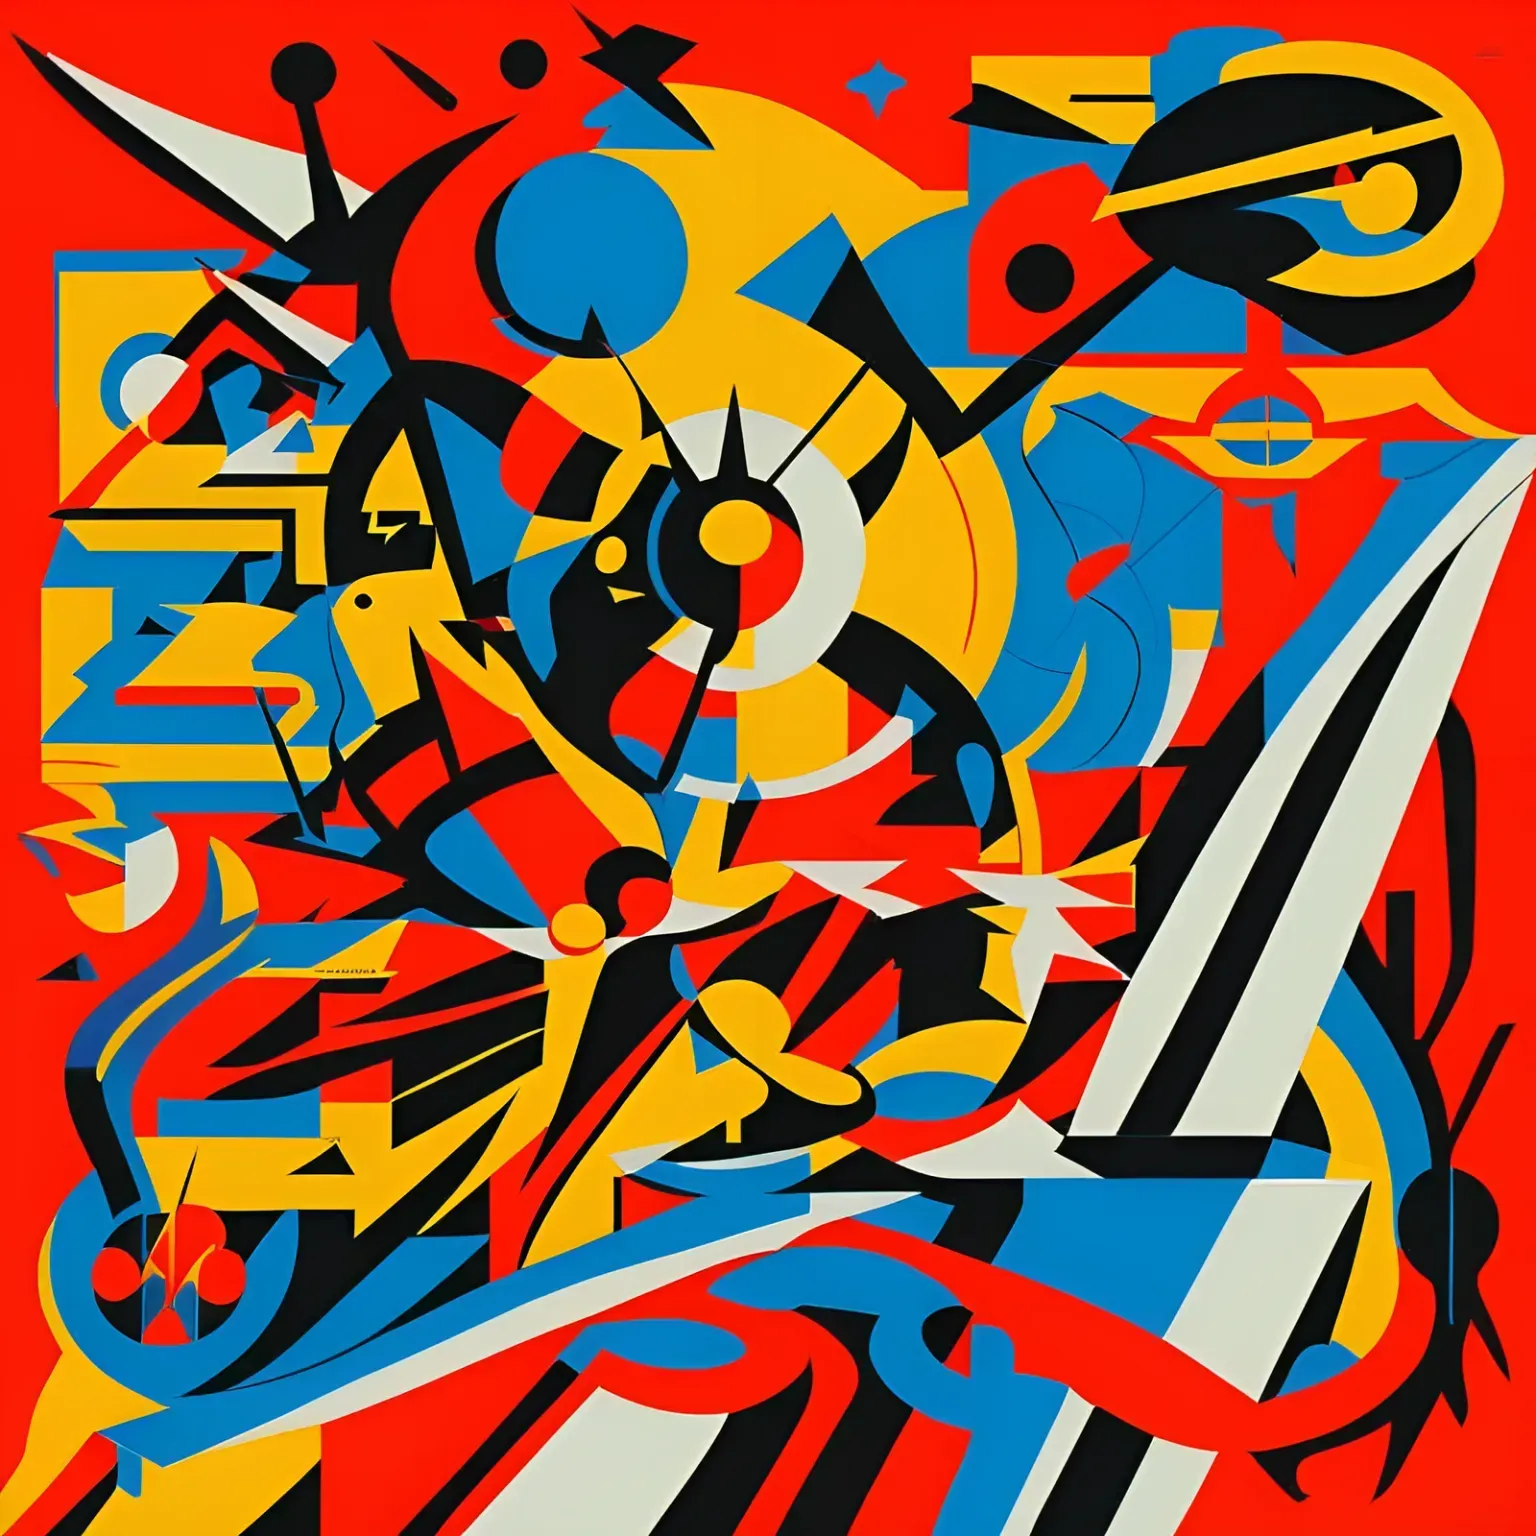 AI interpretation of the text: Using the abstract style of Kandinsky, create an image that embodies the spirit of the Martial Brotherhood. This ideological martial union, established in 2021, emphasizes unwavering commitment to Armenian independence and self-defense. The image should convey a sense of unity, strength, and determination. Use vibrant colors, bold shapes, and dynamic compositions to capture the essence of the Brotherhood's values. Let the image speak volumes about courage, bravery, devotion, loyalty, and the ongoing struggle for Armenian independence. Focus on expressing the fusion of physical and intellectual power through abstract forms and energetic brushstrokes